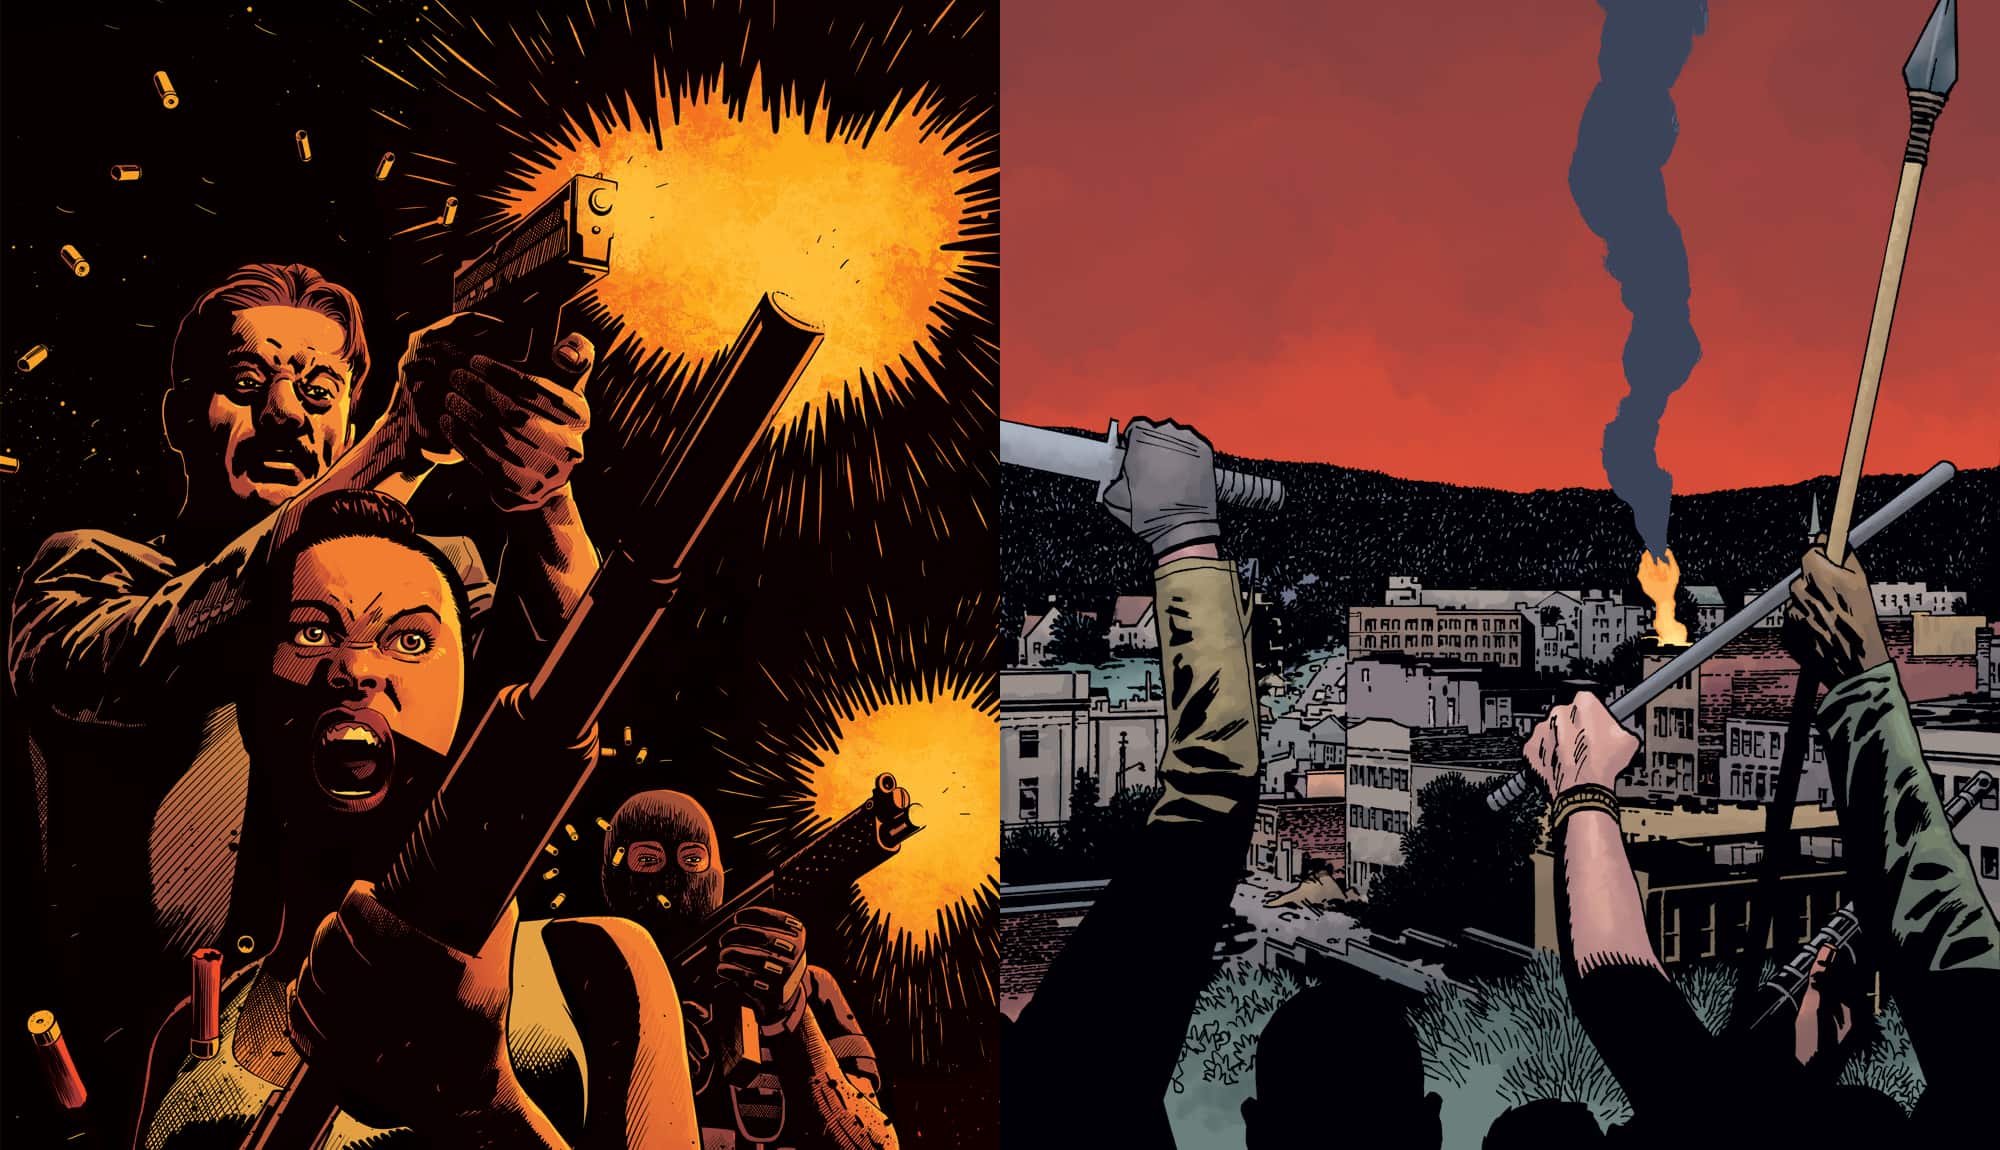 This Week’s Comics: Gasolina #17 and The Walking Dead #190